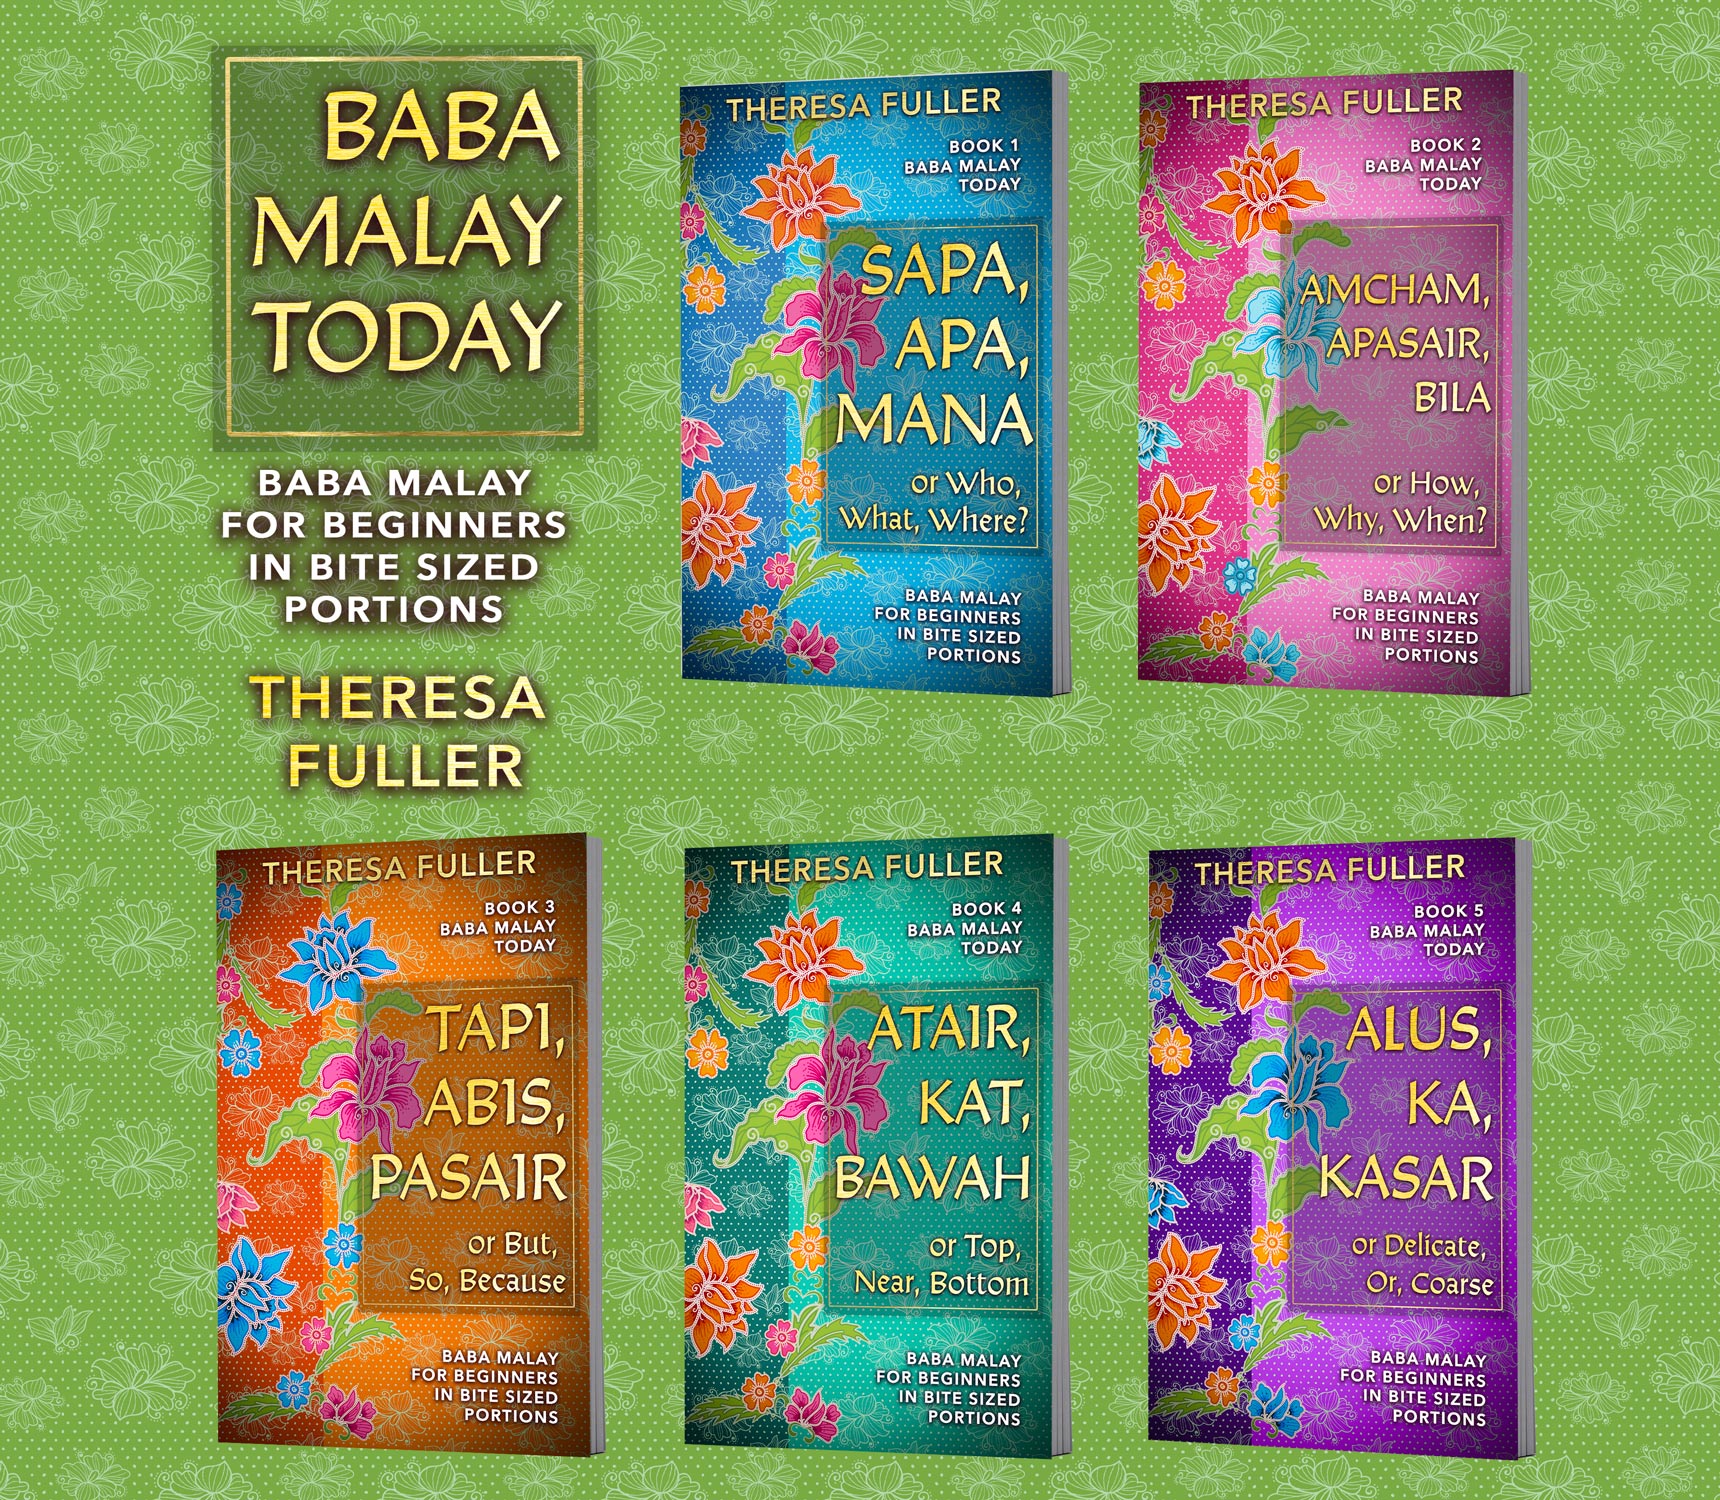 Baba Malay Banner with 5 books displayed